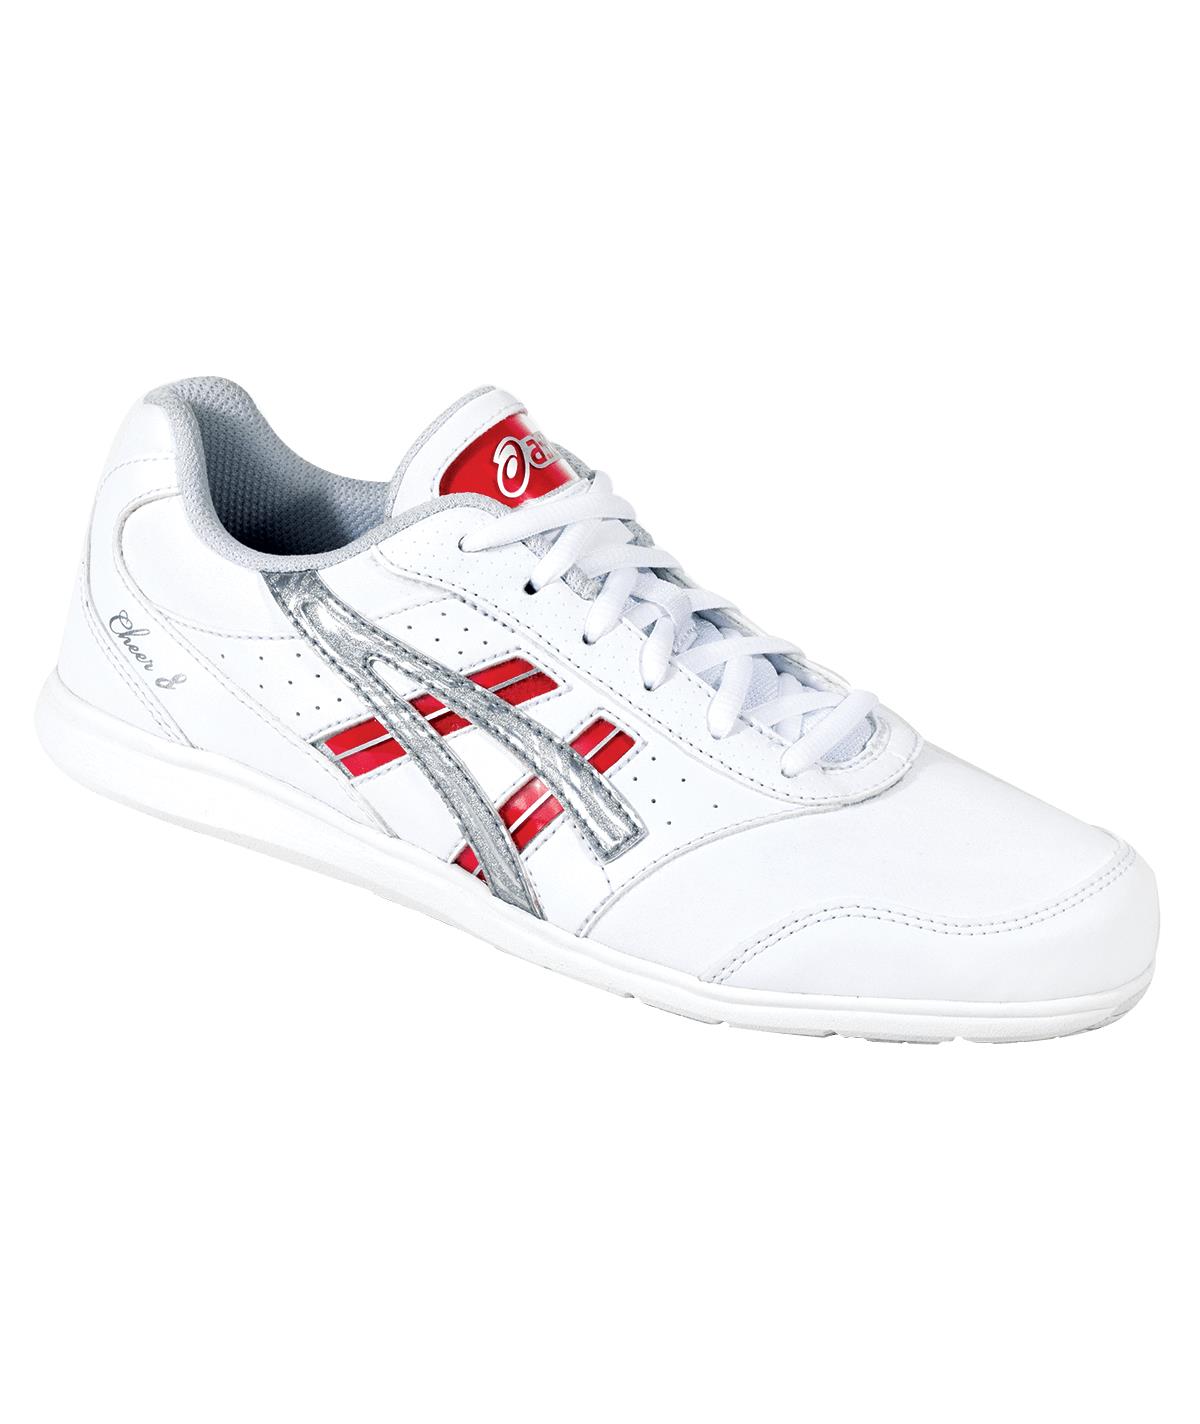 white asics cheerleading shoes, OFF 76 